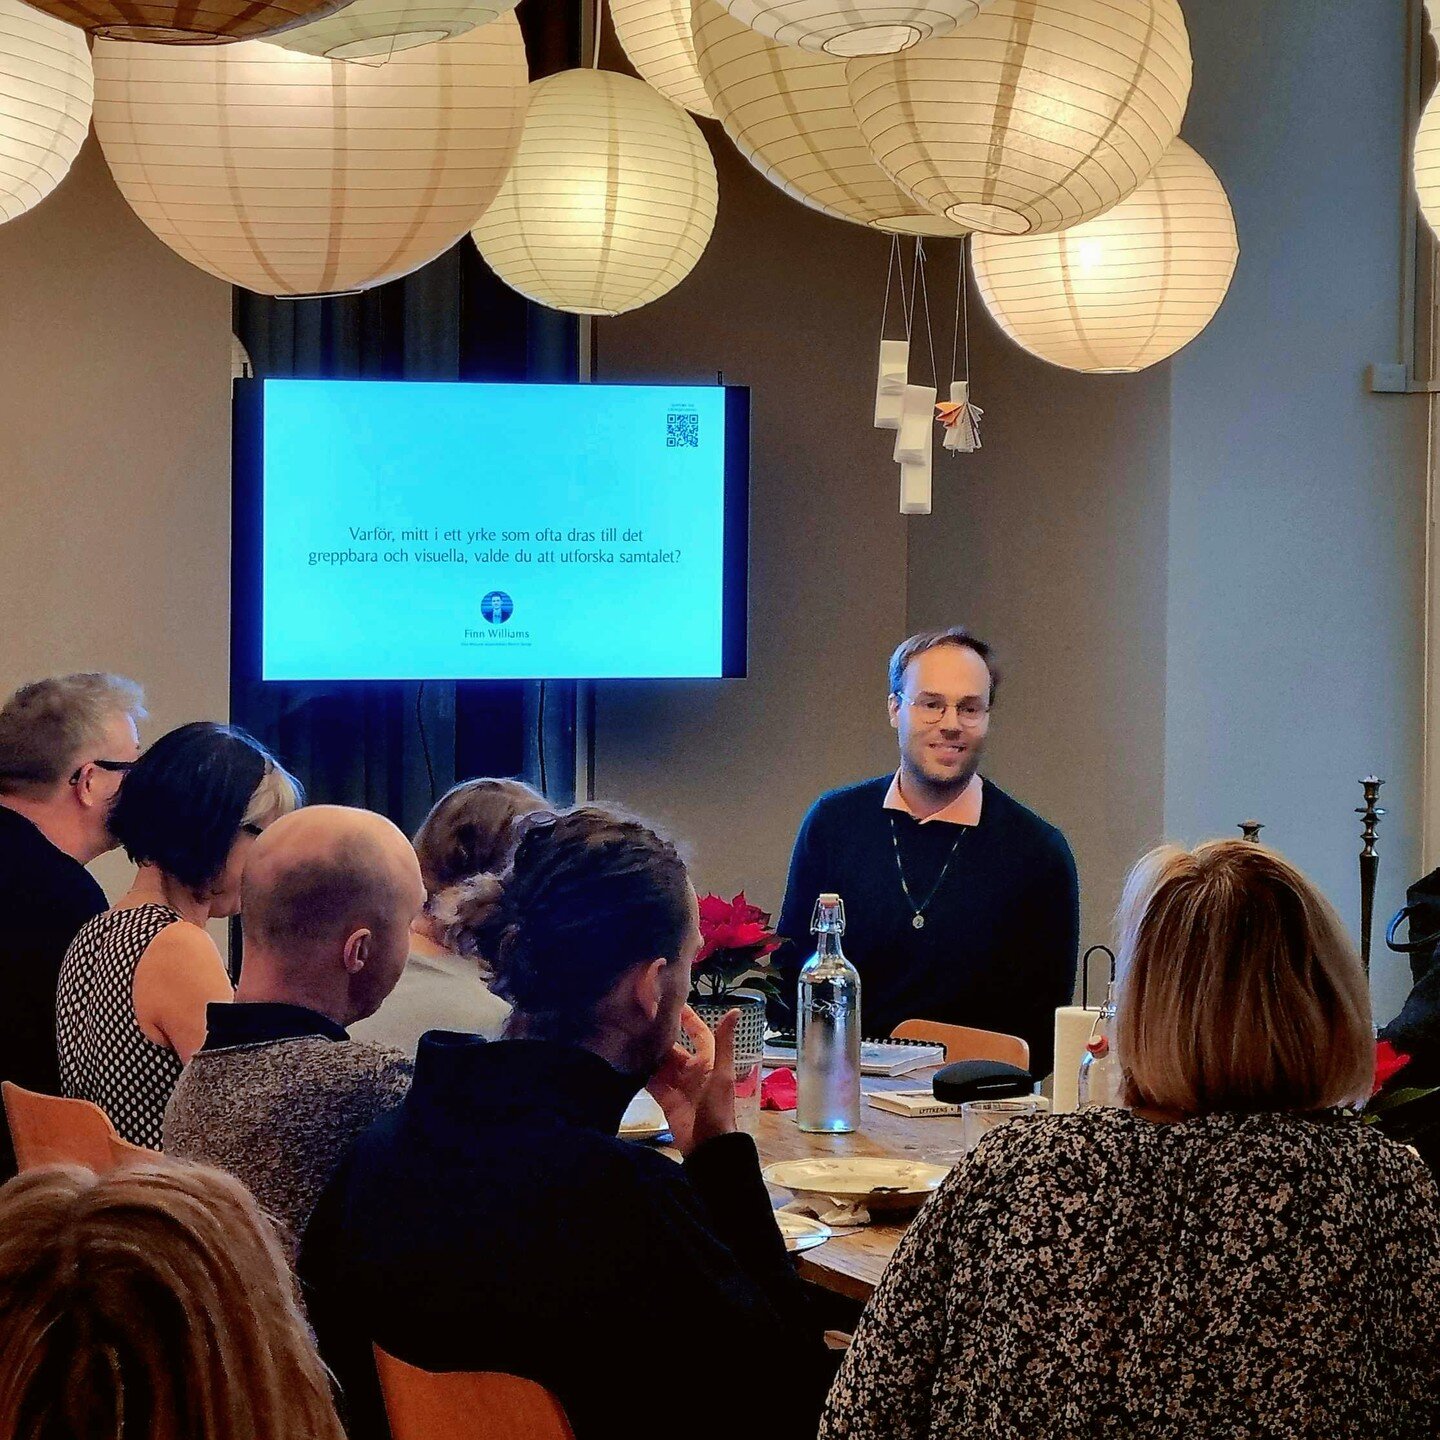 Gratitude to Gustav Magnusson for an insightful lunch lecture at Ritverkstan about the book ''Keynote Conversations'' as a part of initiating a book release crowdfunding campaign.

Check the link for more info and support the project:
https://www.kic